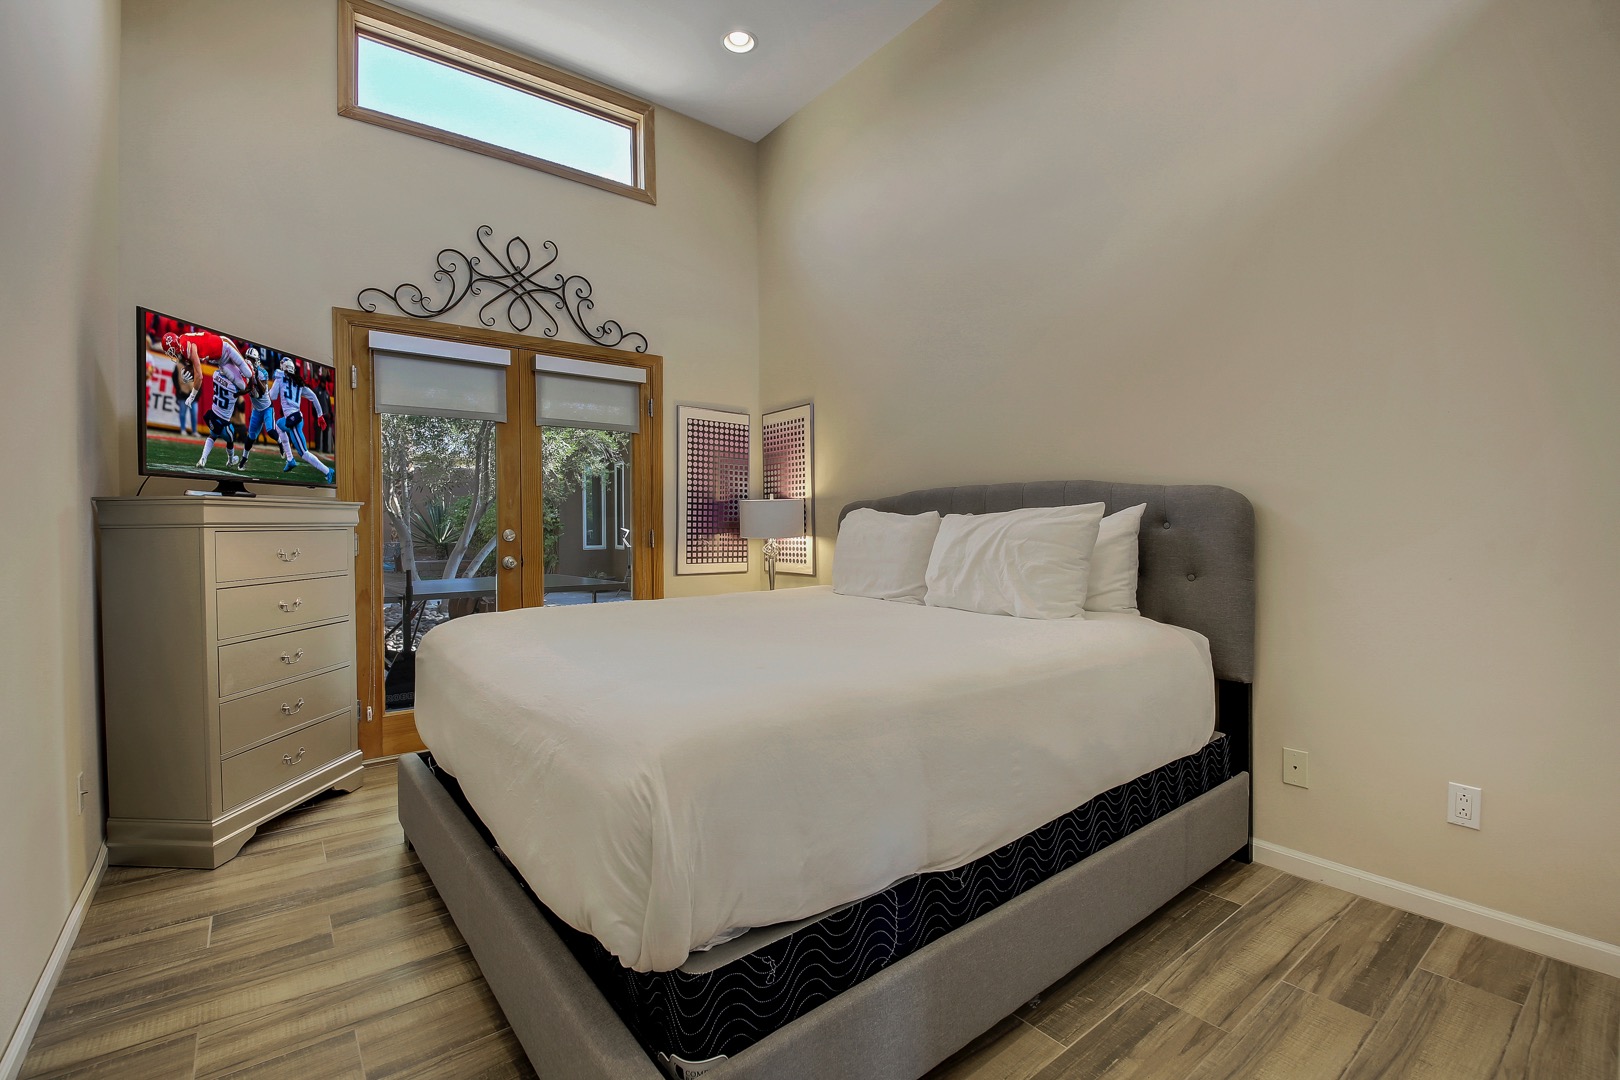 Bedroom 5 has a King-sized bed, Smart TV, reach-in closet and exterior doors to the ping pong patio.